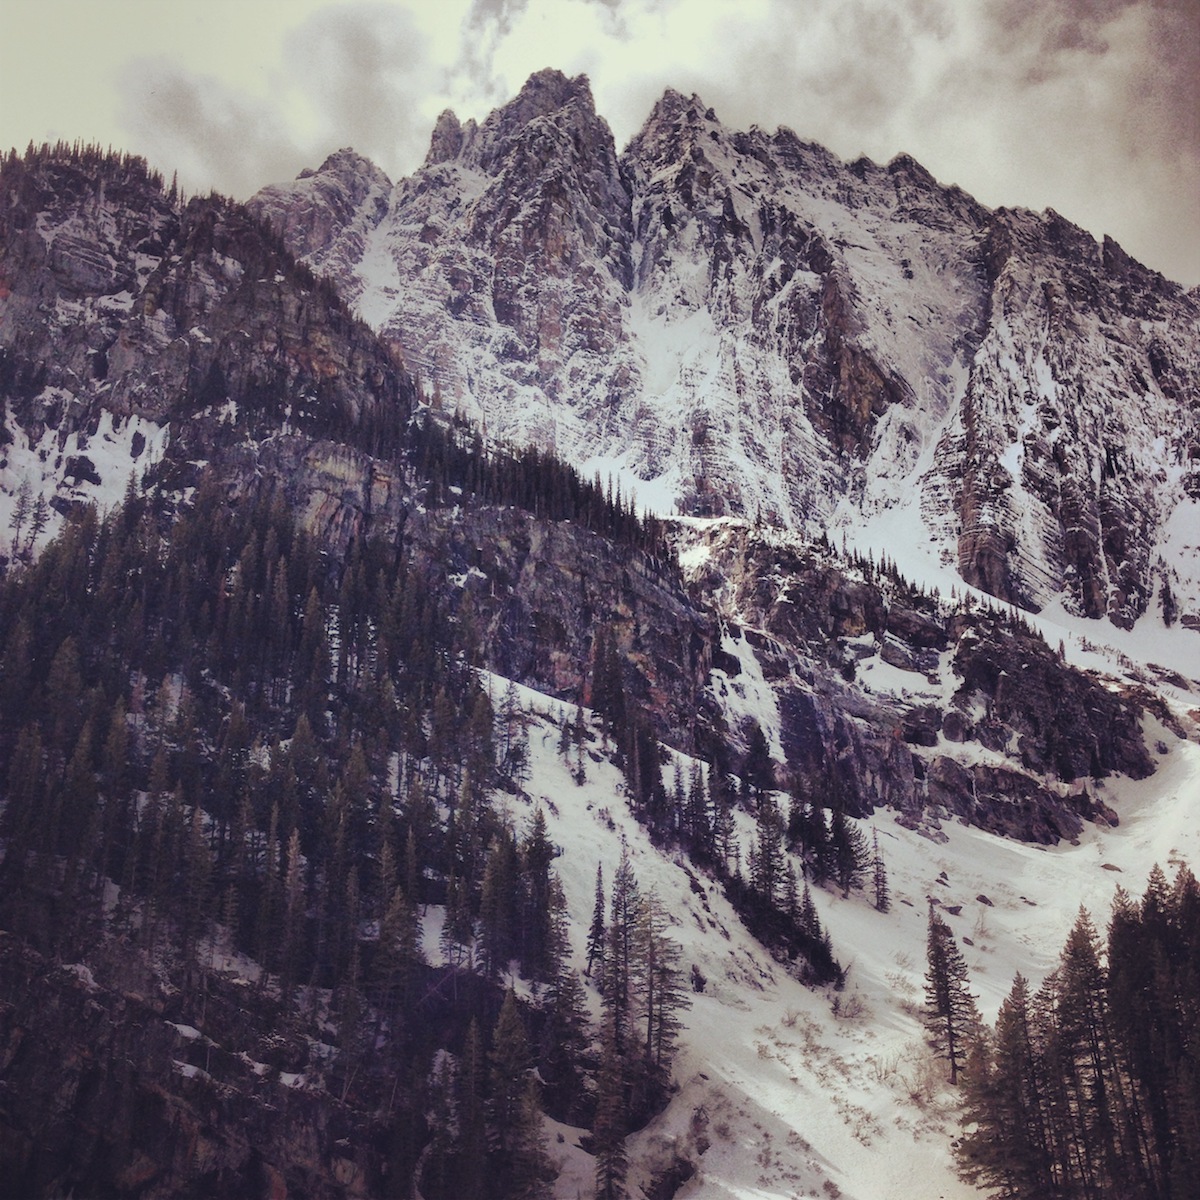 A Peak's north face with the prominent couloir of Canmore Wedding Party visible in the center. [Photo] Jess Roskelley